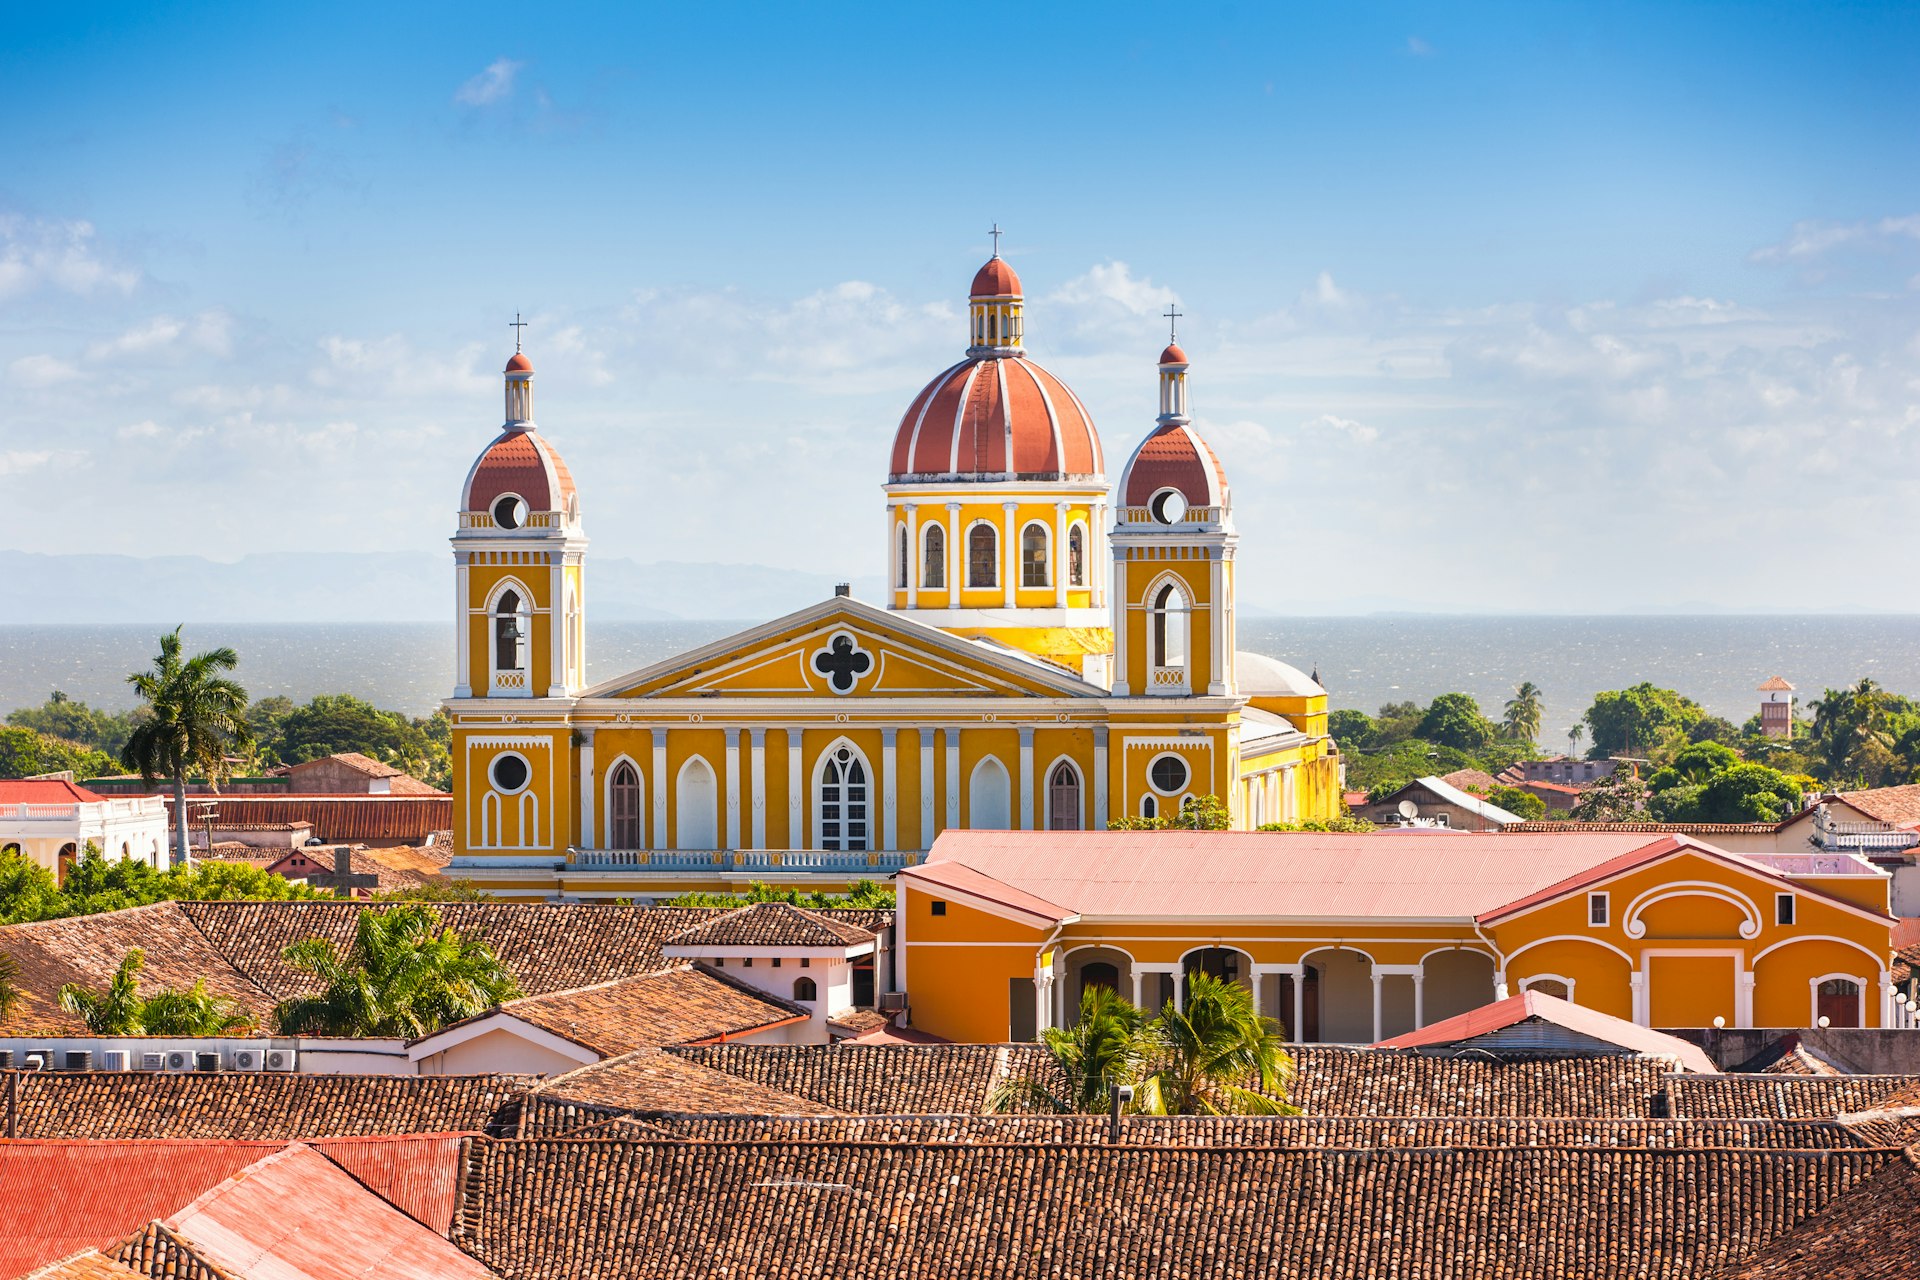 An aerial view of Granada, Nicaragua's colonial architecture, showing tiled roofs and the large yellow church